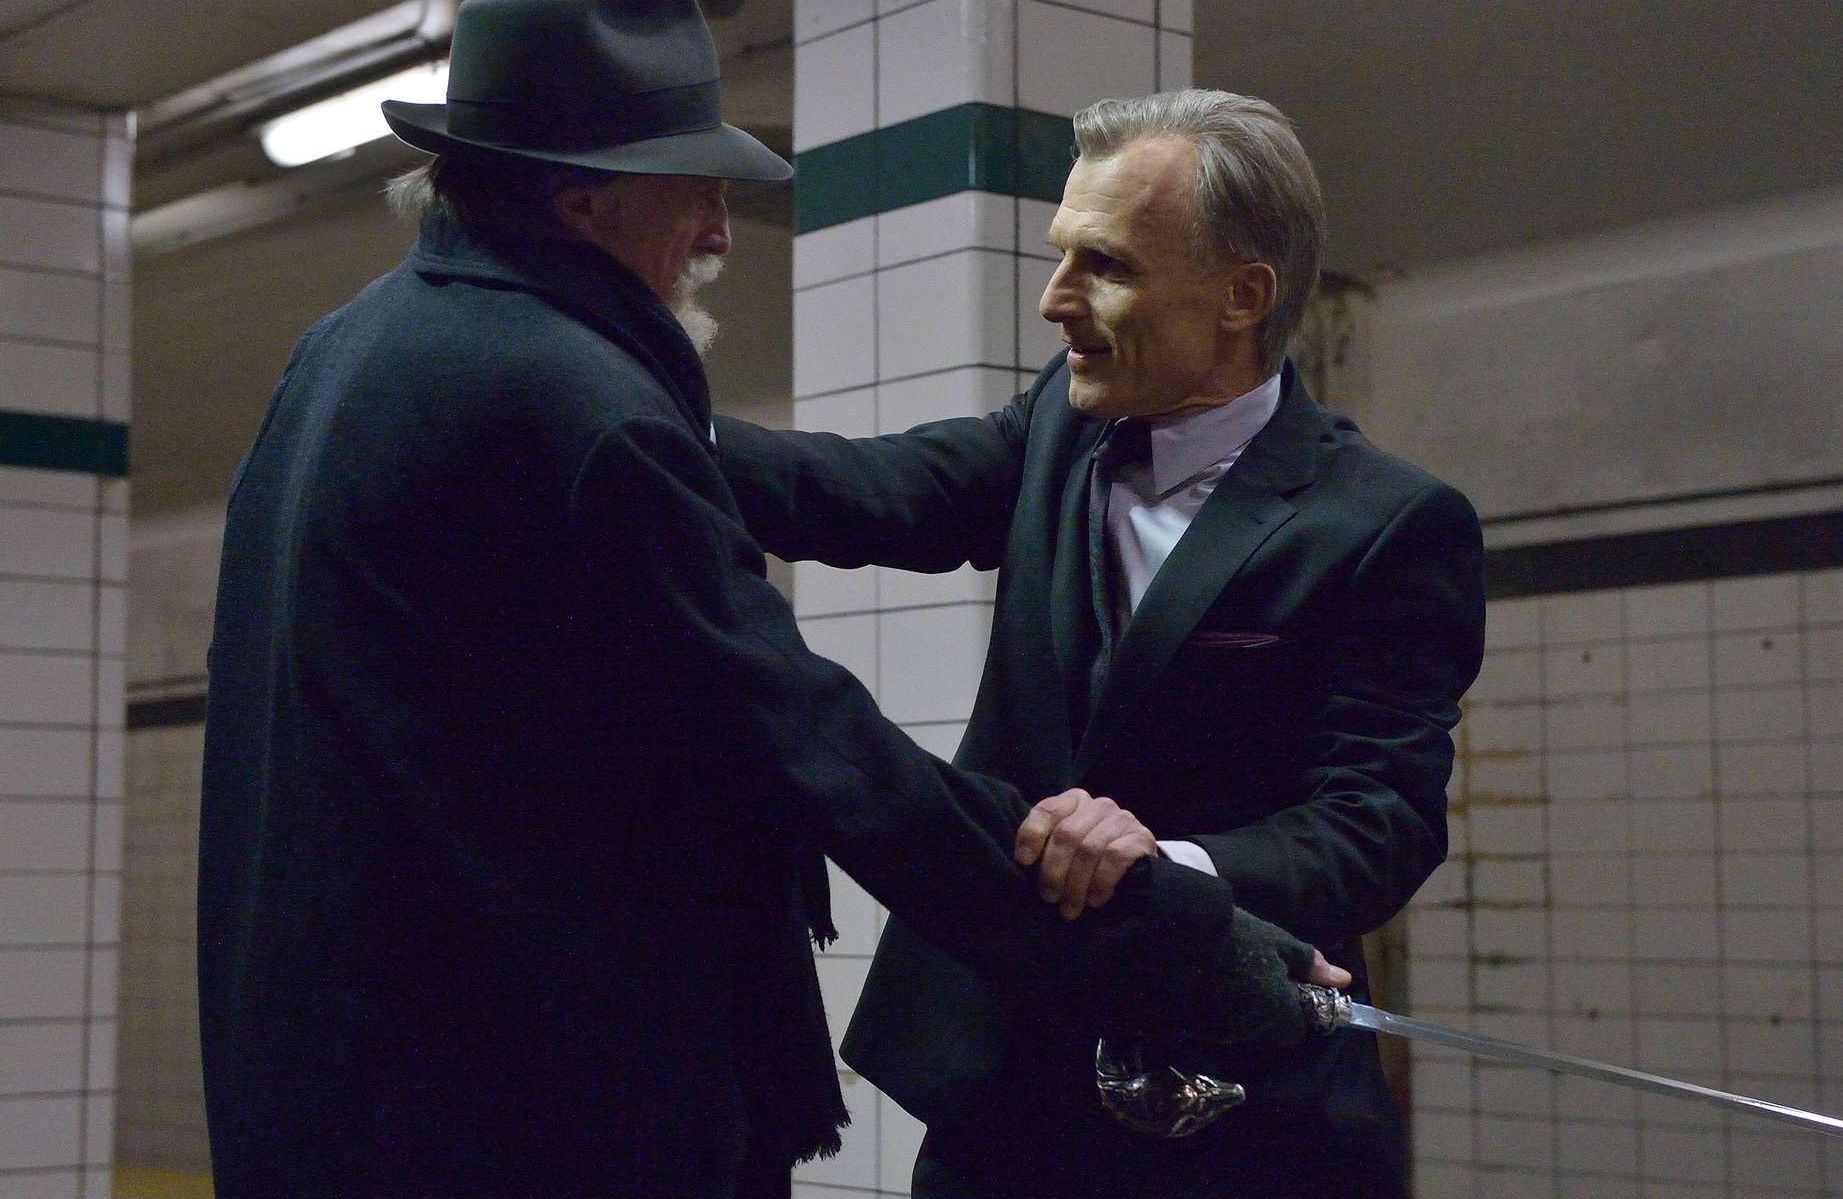 Setrakian and the german vampire fight in The Strain